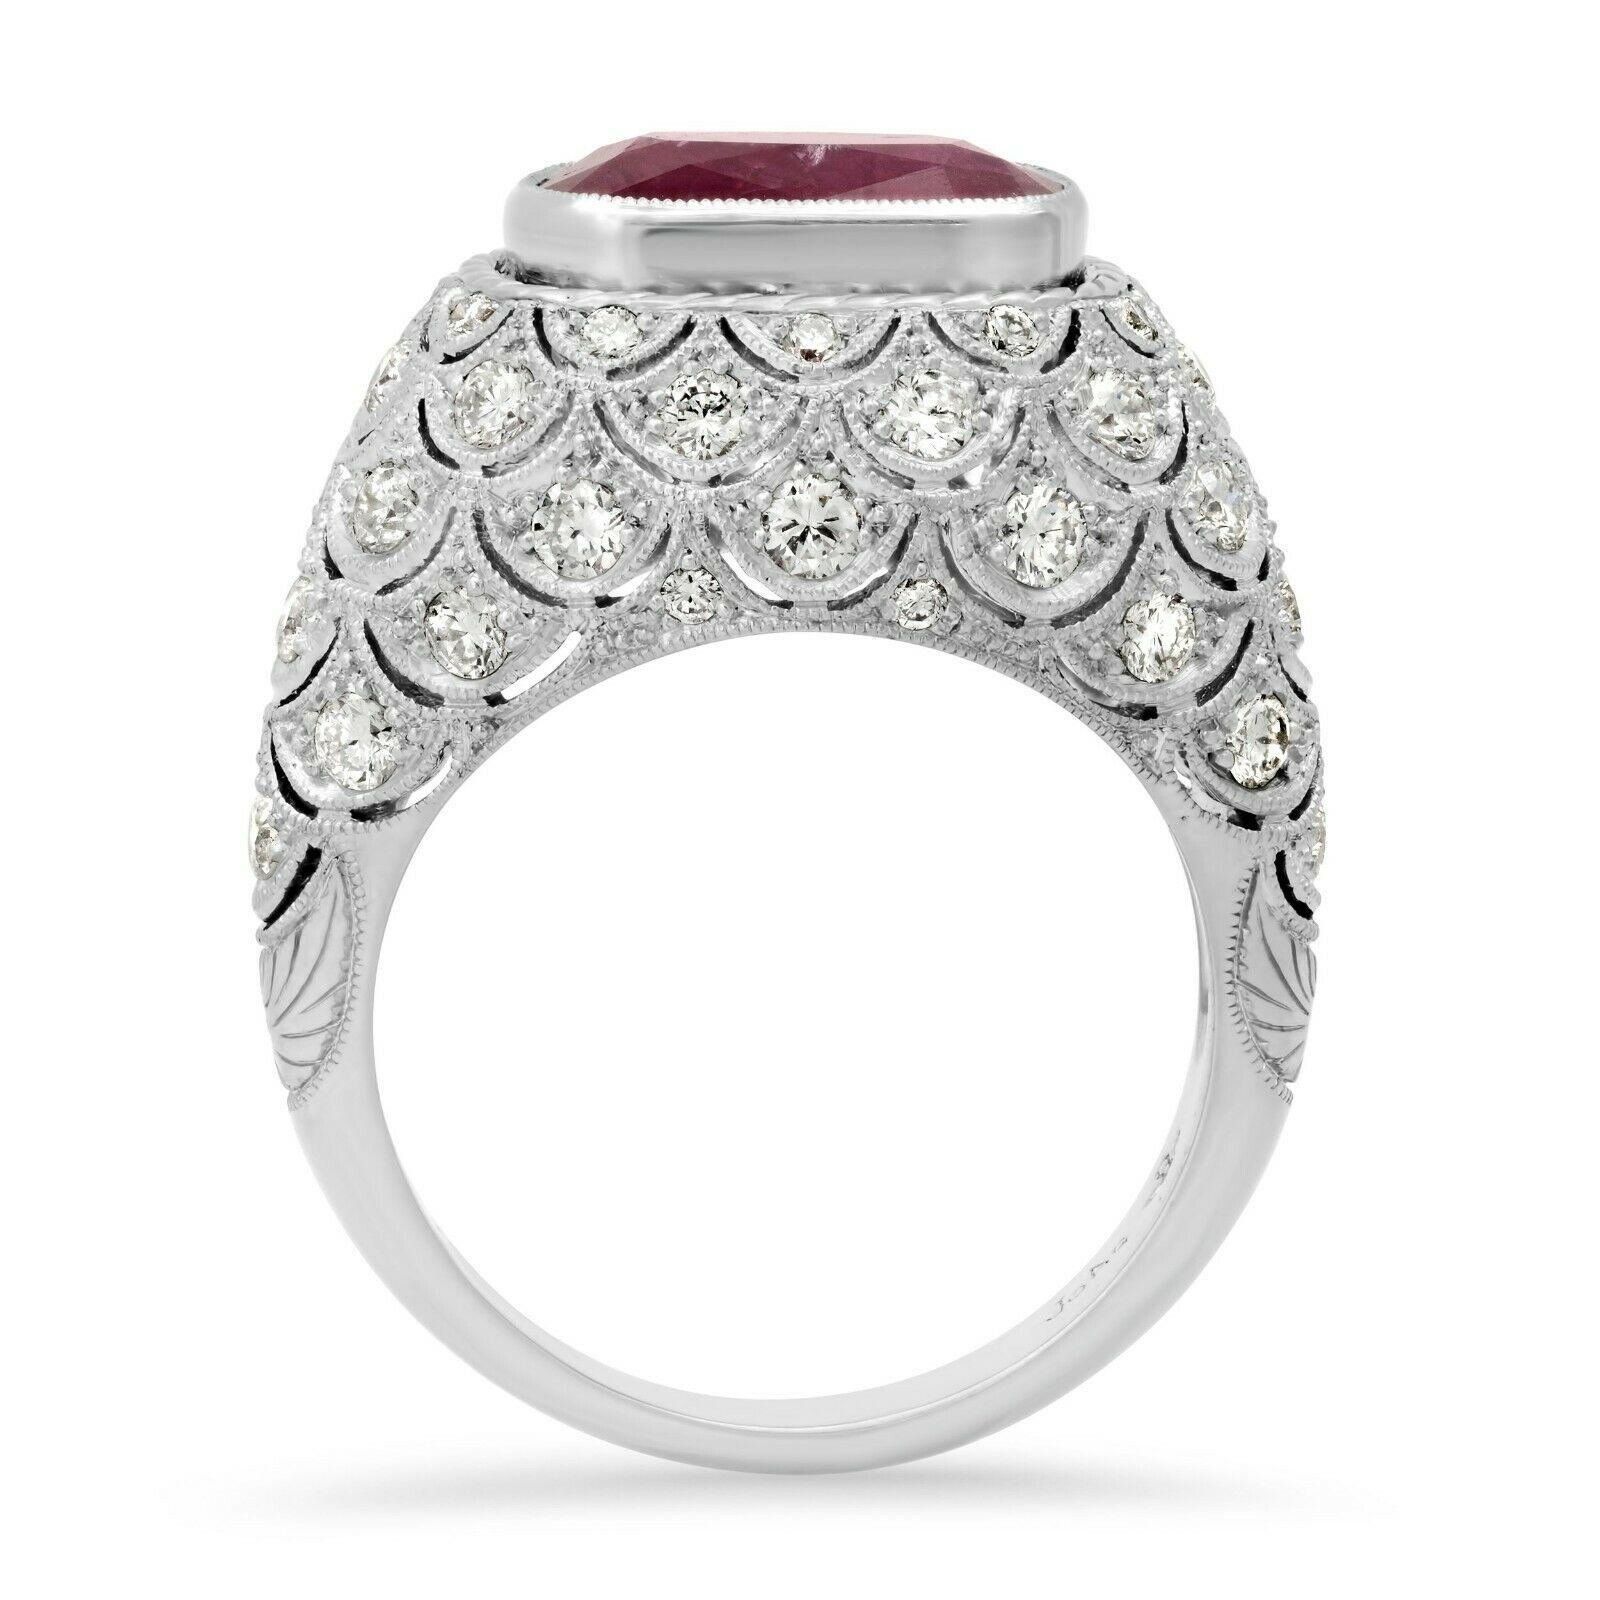 Ruby (4.29 carat center) and diamond (1.2 total carat weight) antique inspired cocktail ring in 900 platinum. The ring is designed and handmade locally in Los Angeles by Sage Designs L.A. using earth-mined and conflict free diamonds and rubies. Ring